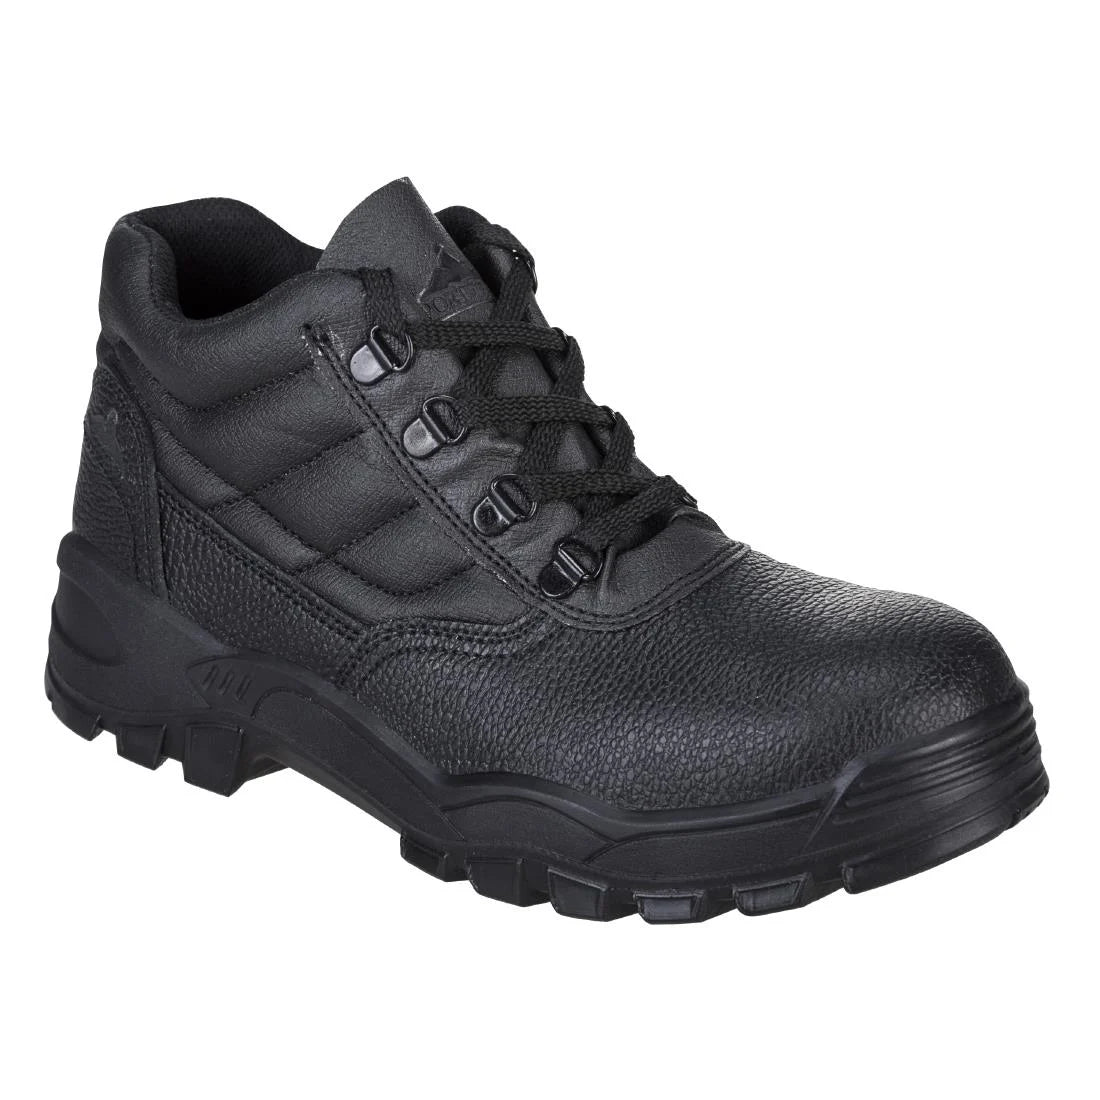 BA059-40 Portwest Protector Boot S1P Black Size 40 JD Catering Equipment Solutions Ltd